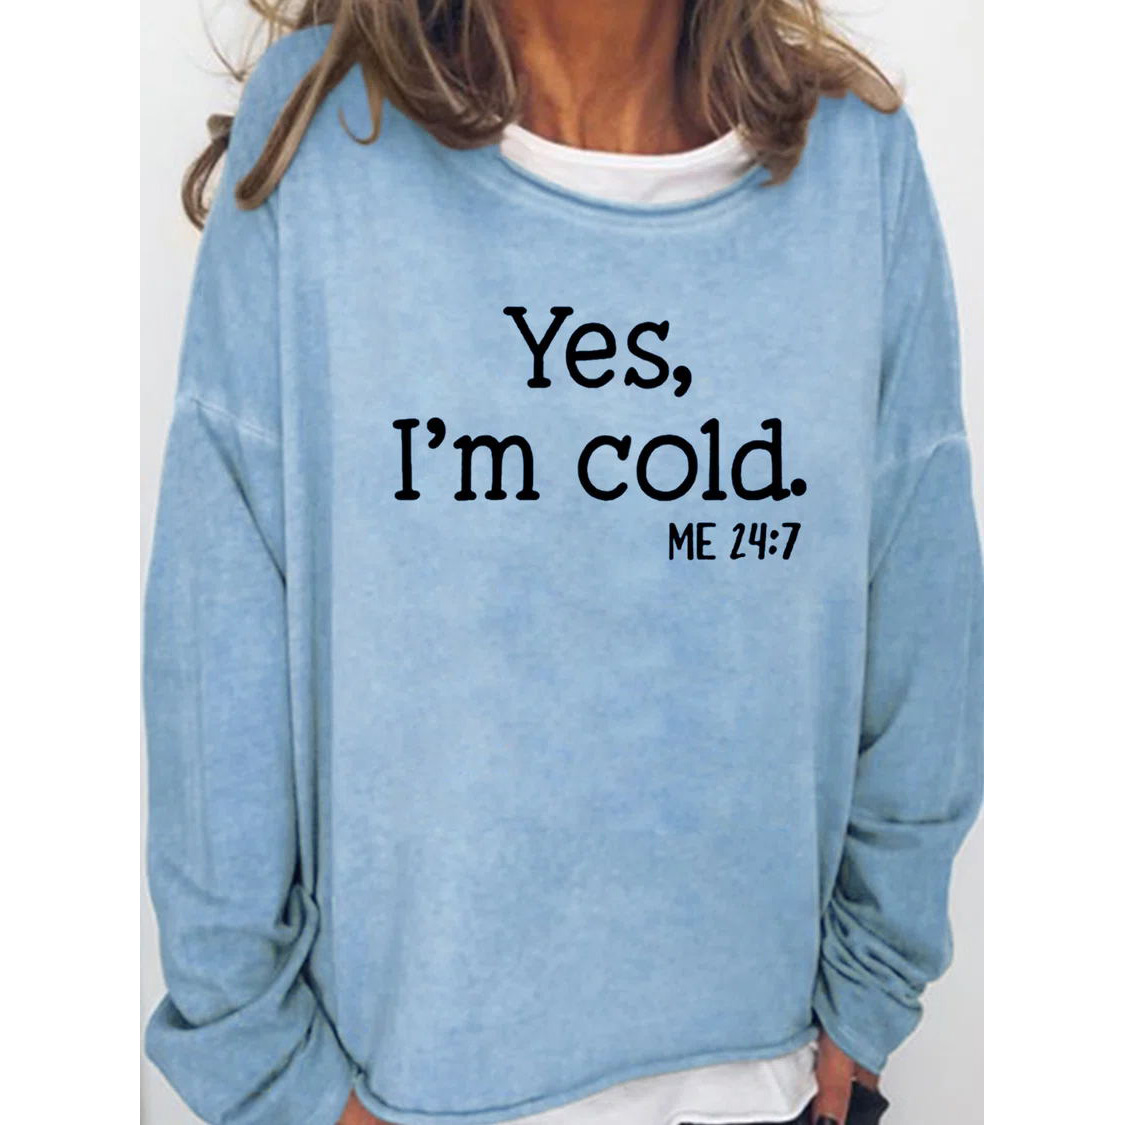 Womens Funny Yes I'm Chic Cold Me 24:7 Winter Sweatshirts